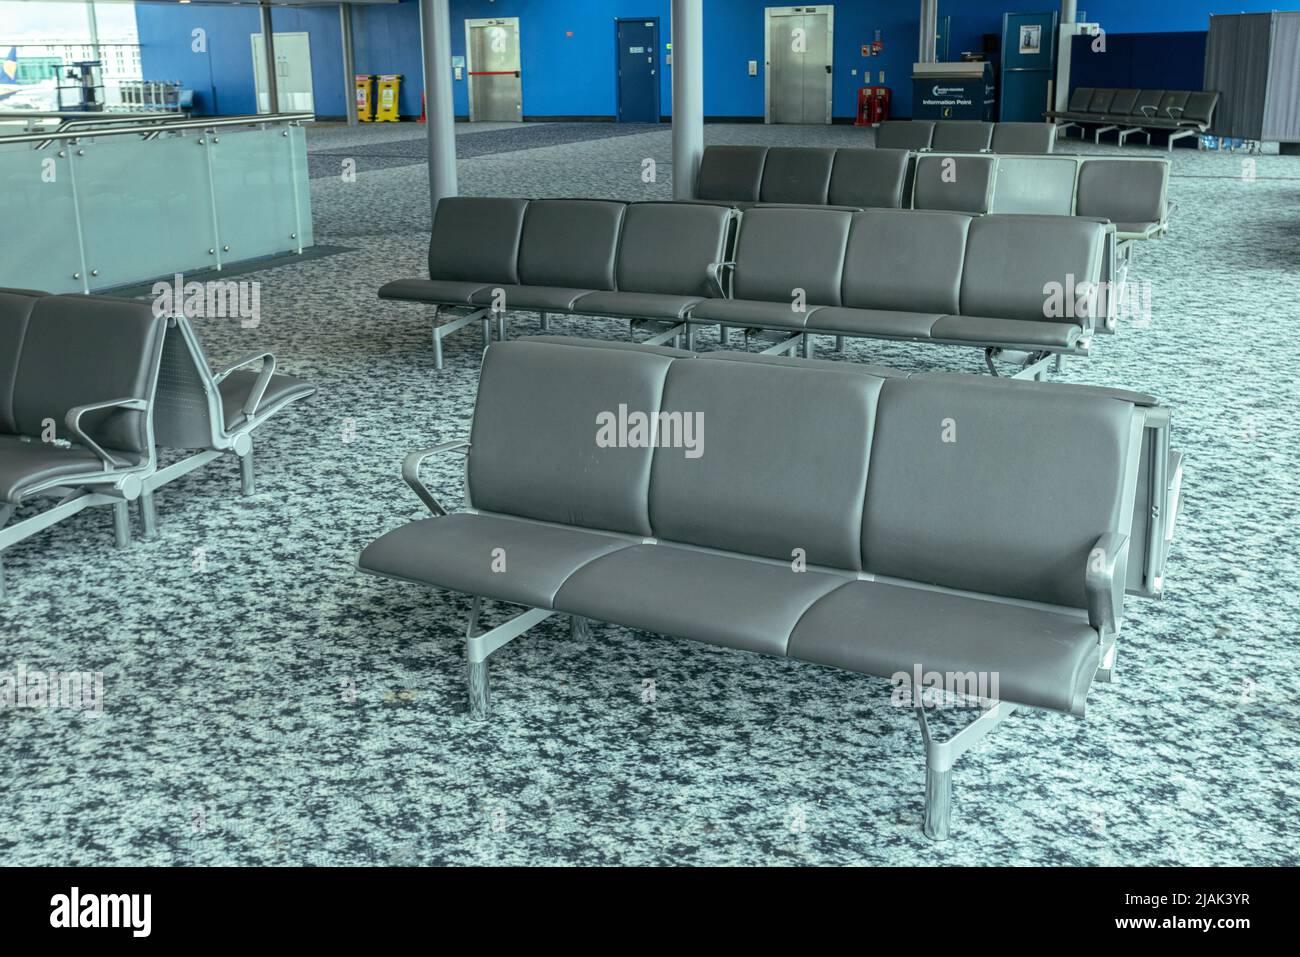 Empty seats at London Stansted airport in the waiting area before boarding Stock Photo